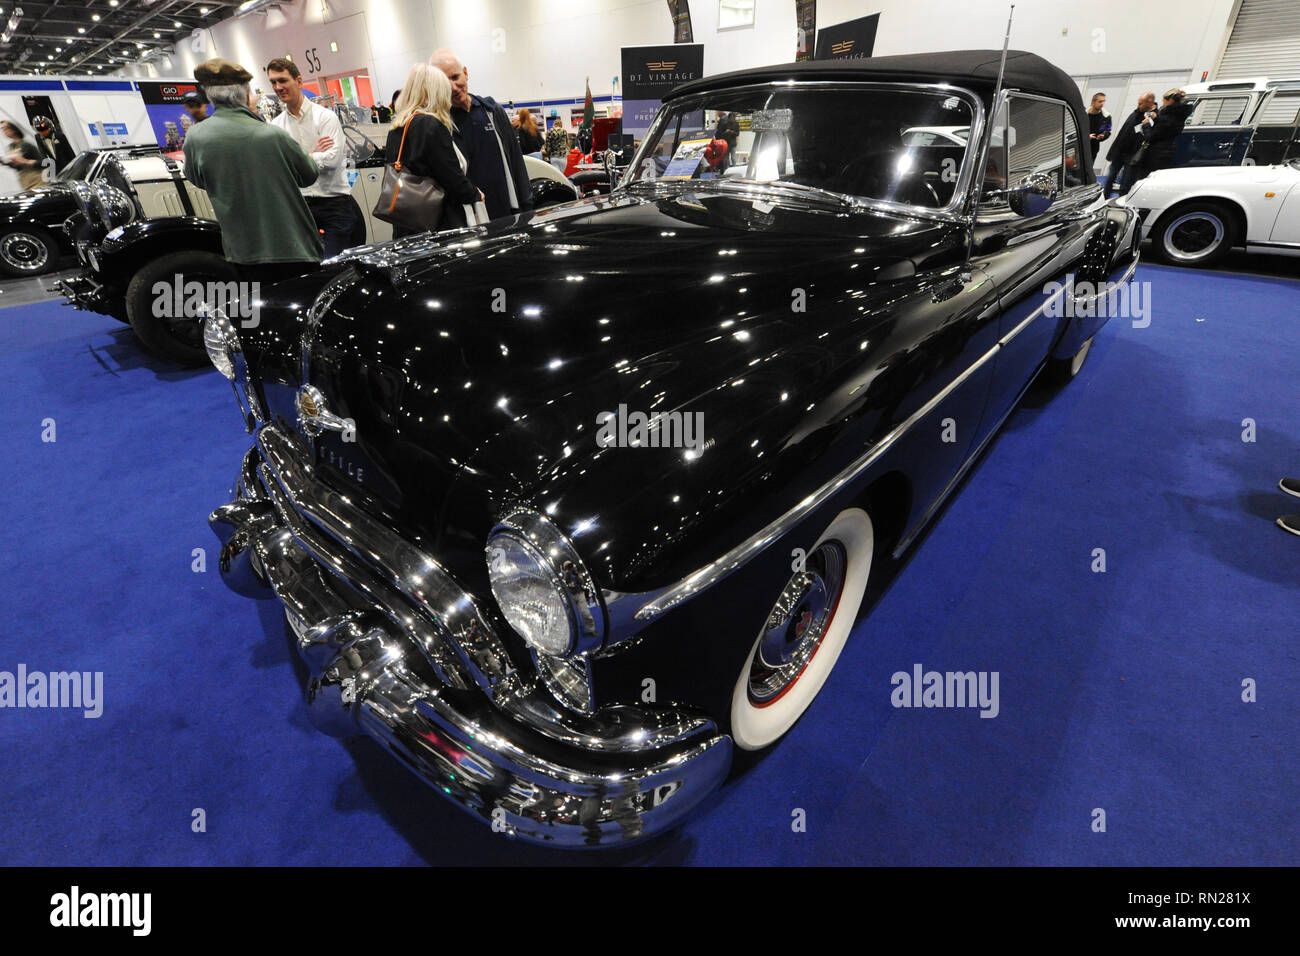 London, UK. 16th Feb 2019. A 1950 Oldsmobile 'Rocket' 88 Convertible on display at the London Classic Car Show which is taking place at ExCel London, United Kingdom.  Around 700 of the world's finest classic cars are on display at the show ranging from vintage pre-war tourers to a modern concept cars. The show brings in around 37,000 visitors, ranging from serious petrol heads to people who just love beautiful and classic vehicles. Credit: Michael Preston/Alamy Live News Stock Photo